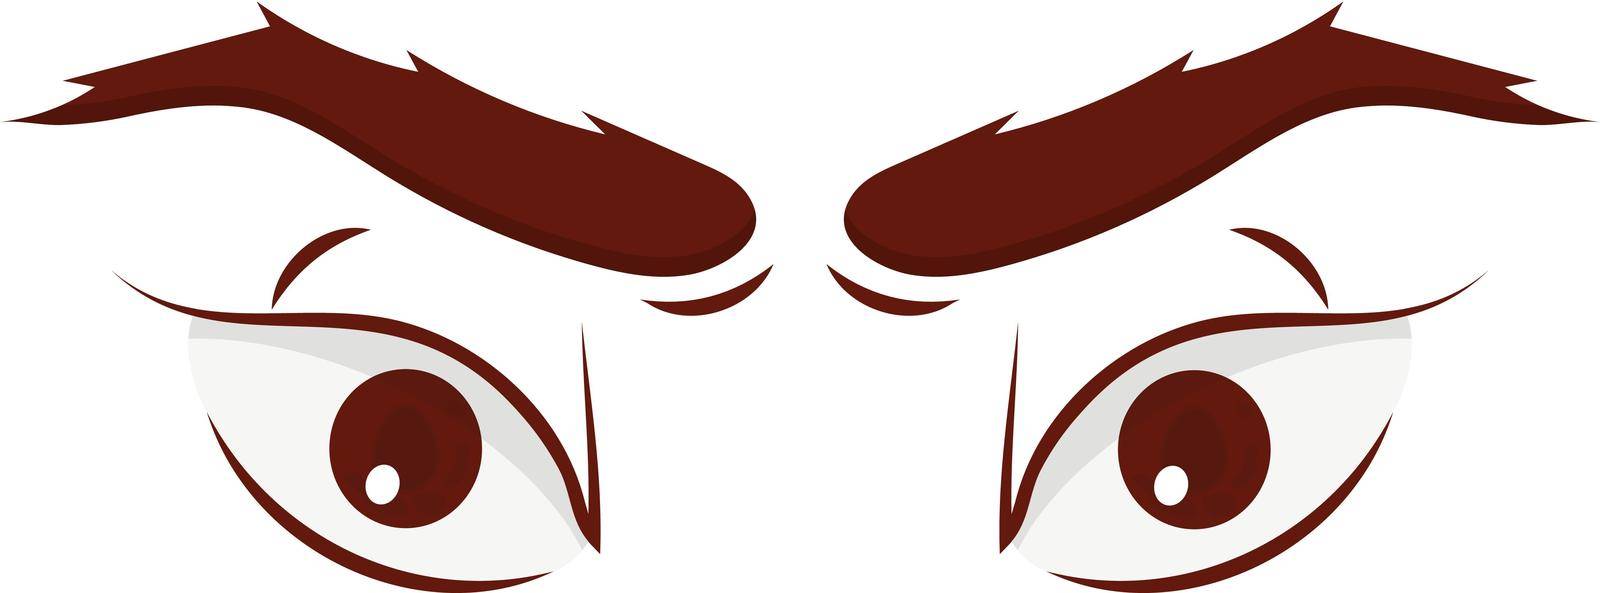 Cartoon eyes and eyebrows with lashes. Isolated vector illustration. by Javvani